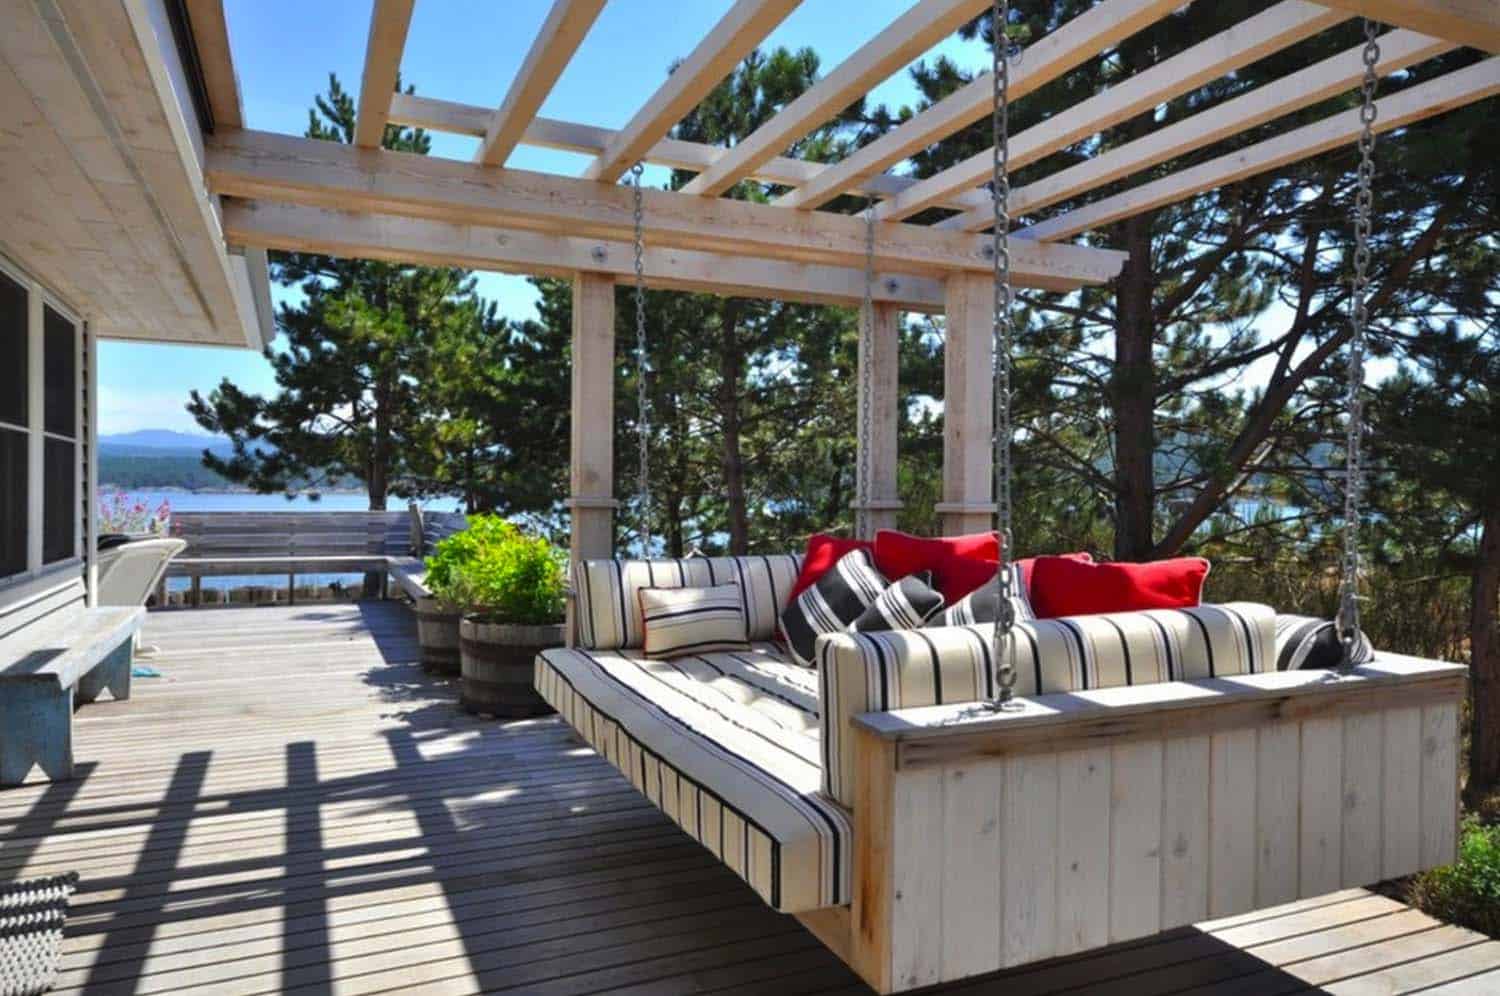 30+ Amazing beach style deck ideas promoting relaxation